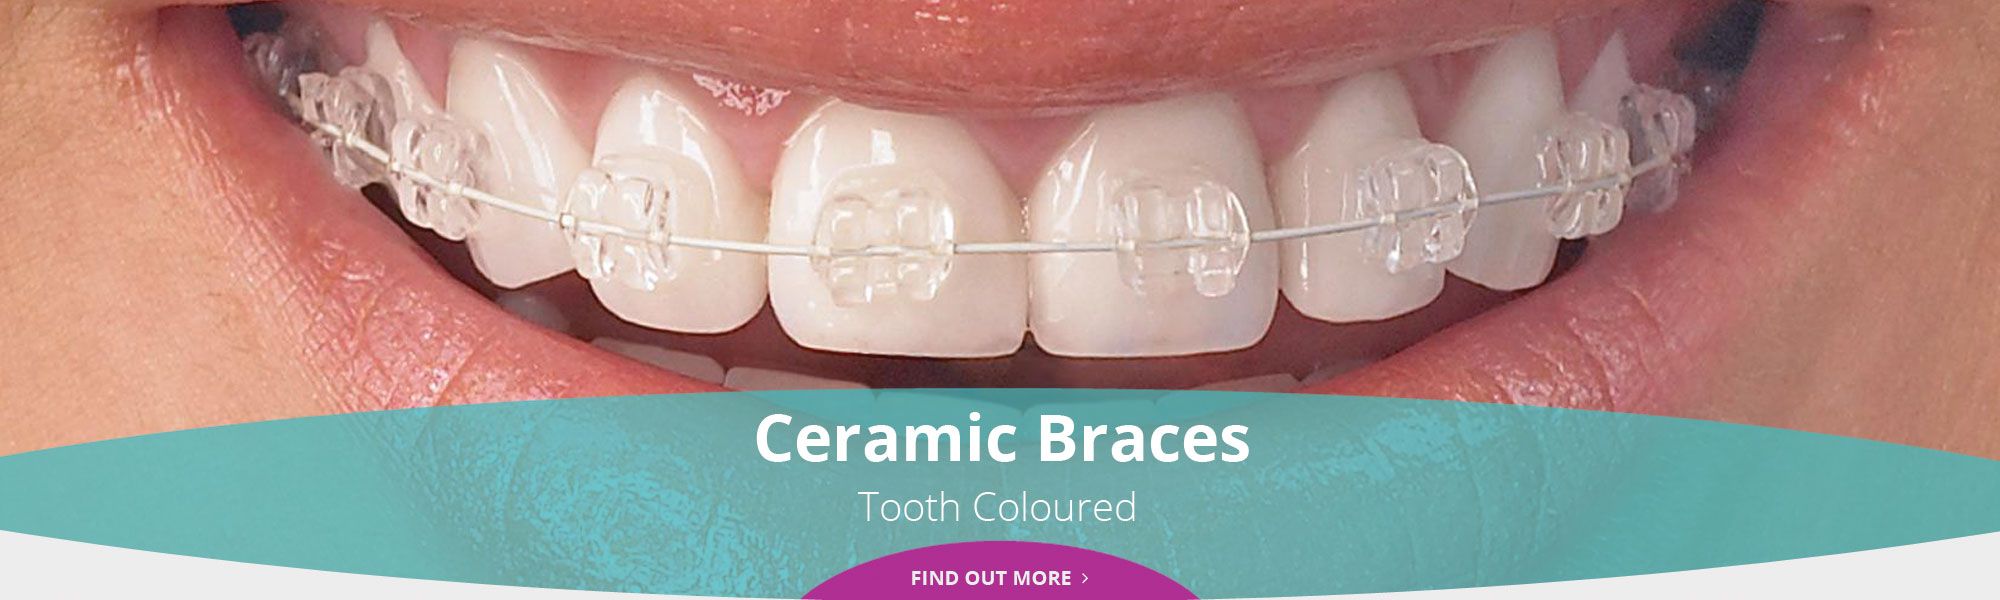 Ceramic Braces - Tooth Coloured - Find out more